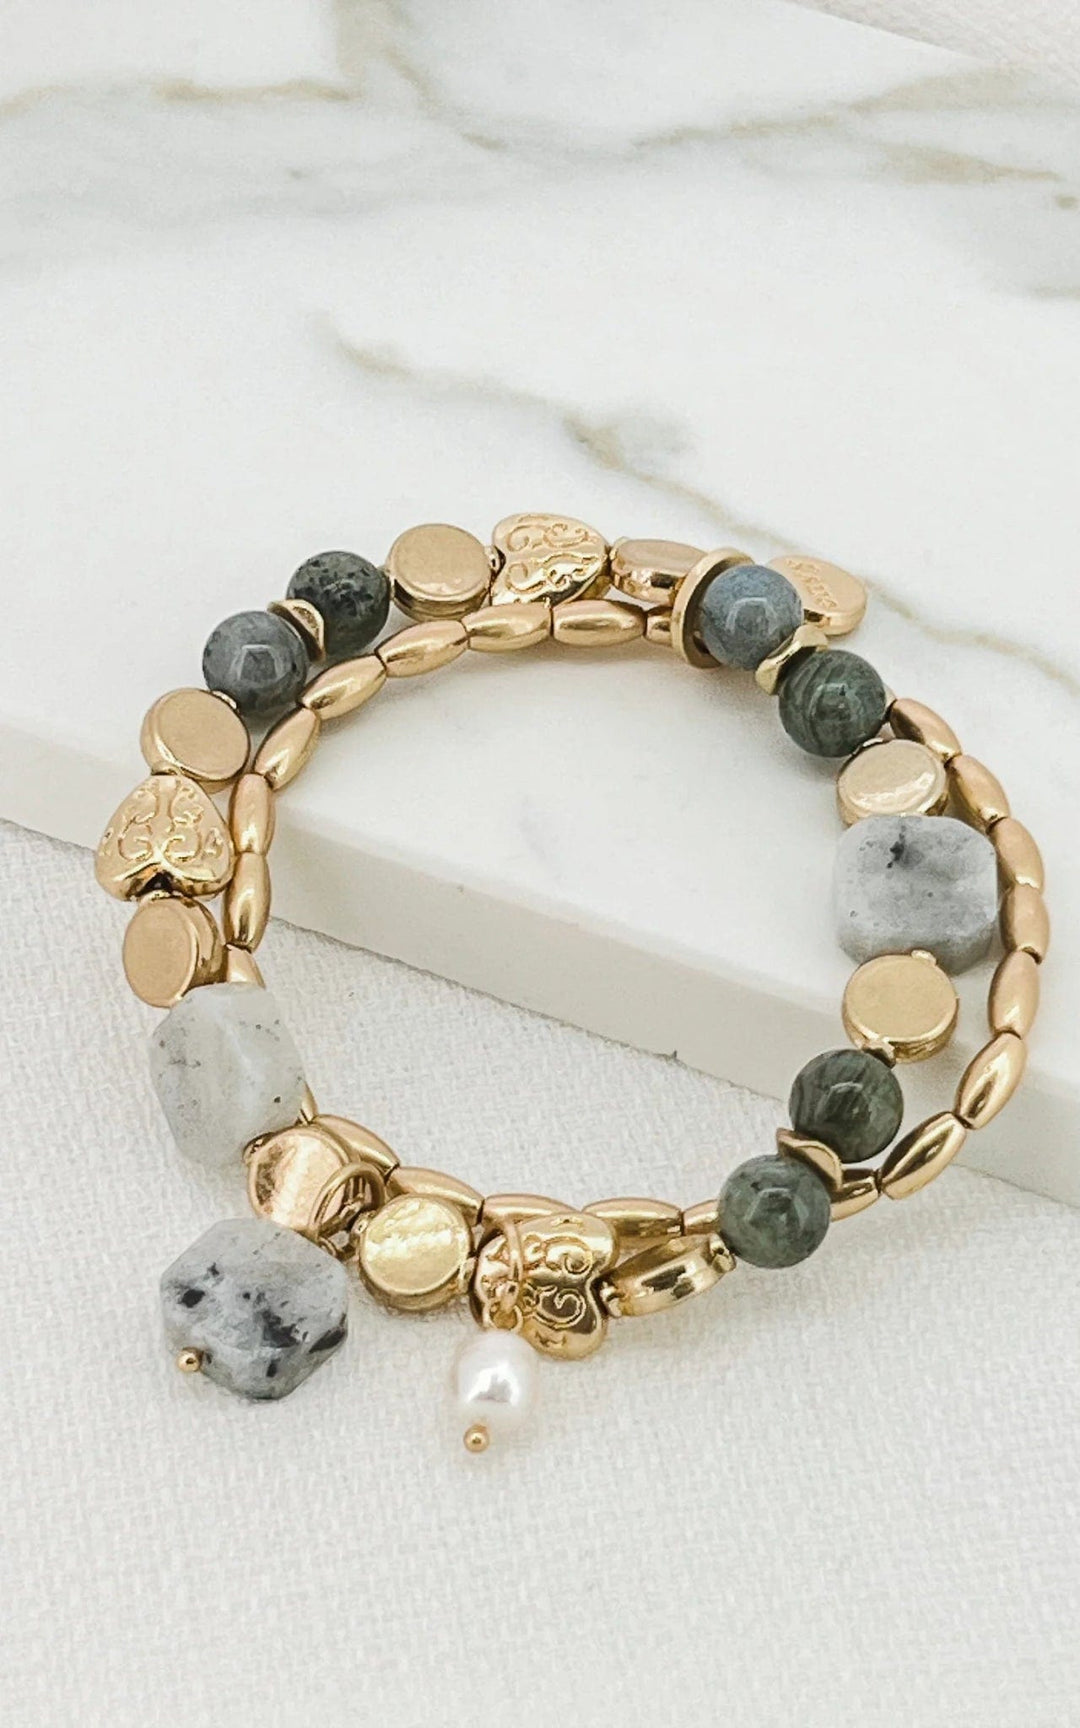 Envy Alloy & Semi Precious Beads Bracelet In Gold & Grey - Crabtree Cottage